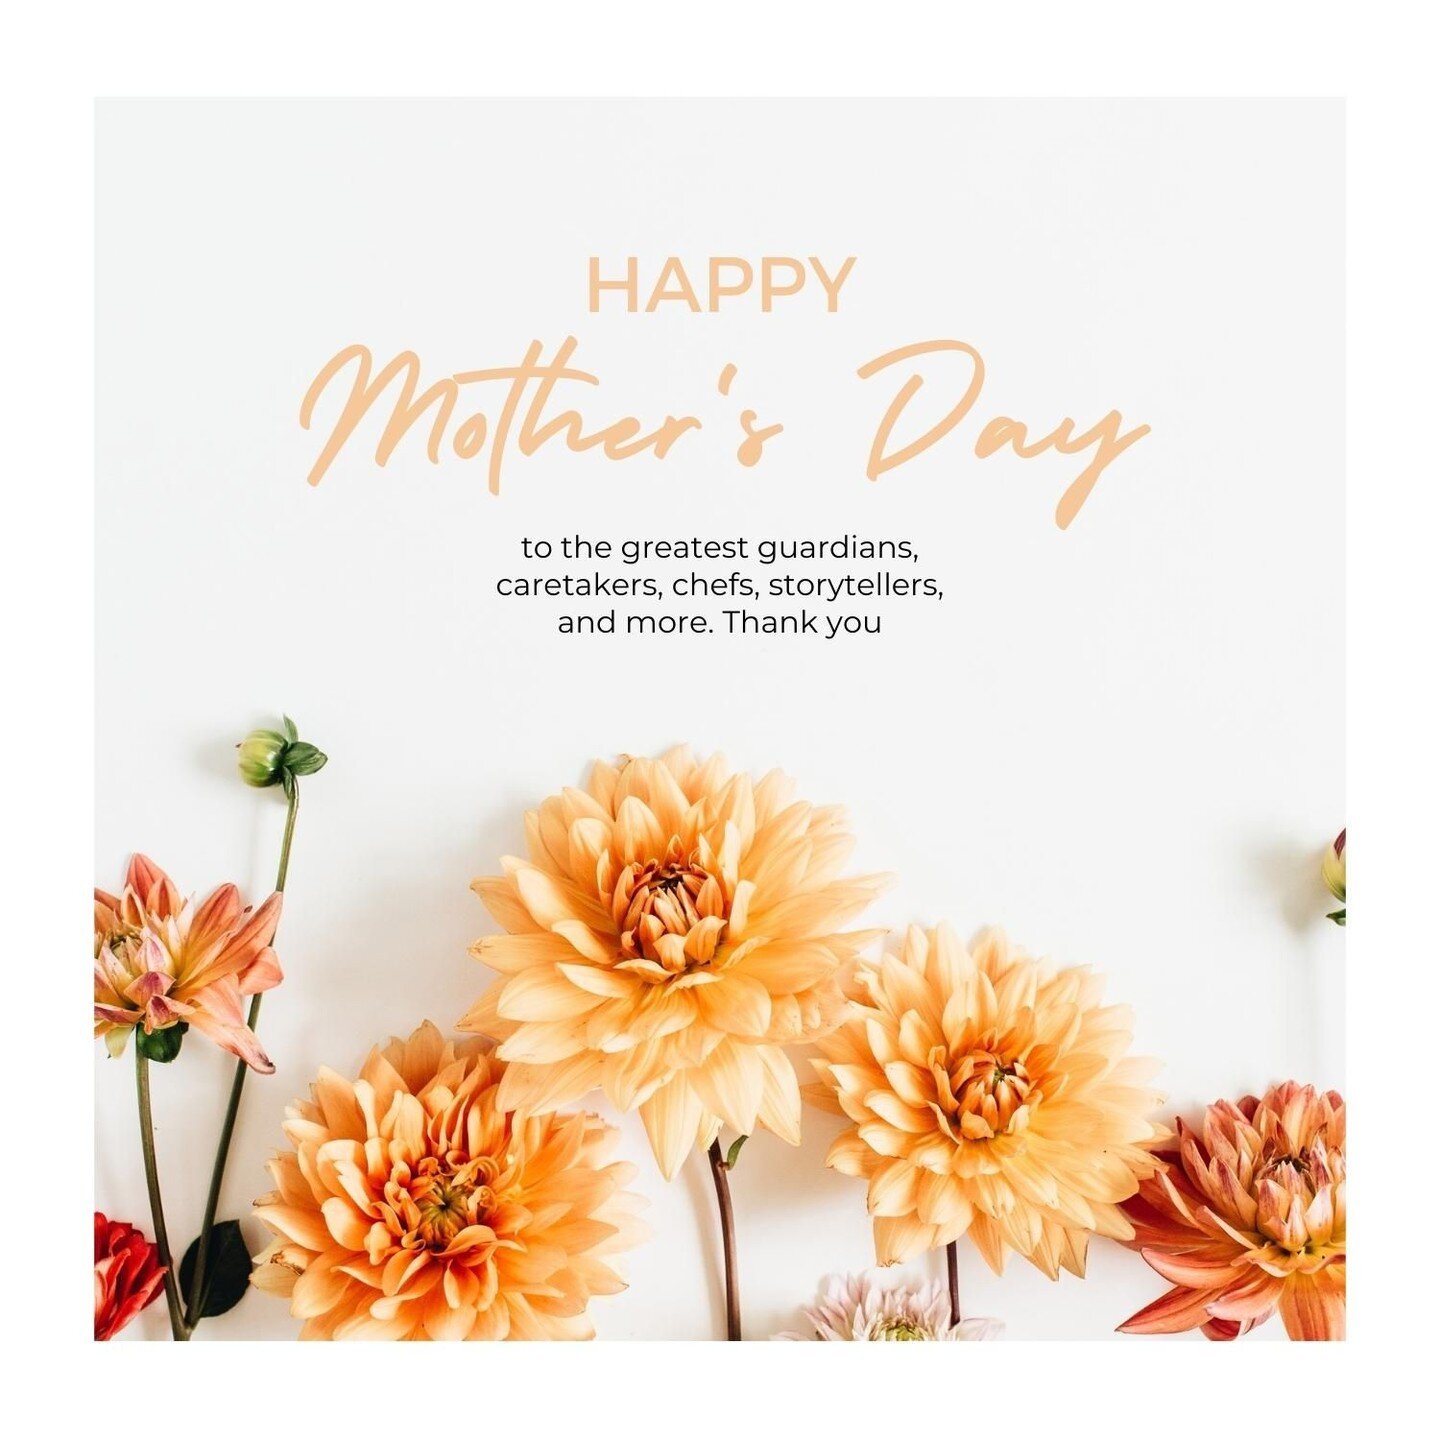 To the amazing mothers in our lives, may you have a day filled with love, happiness, and relaxation. Happy Mother's Day 💐 
.
.
.
.
#realestate #mothersday #mom #celebratemom #appreciationpost #mum #socalliving #longbeach #mama #thankyou #explore